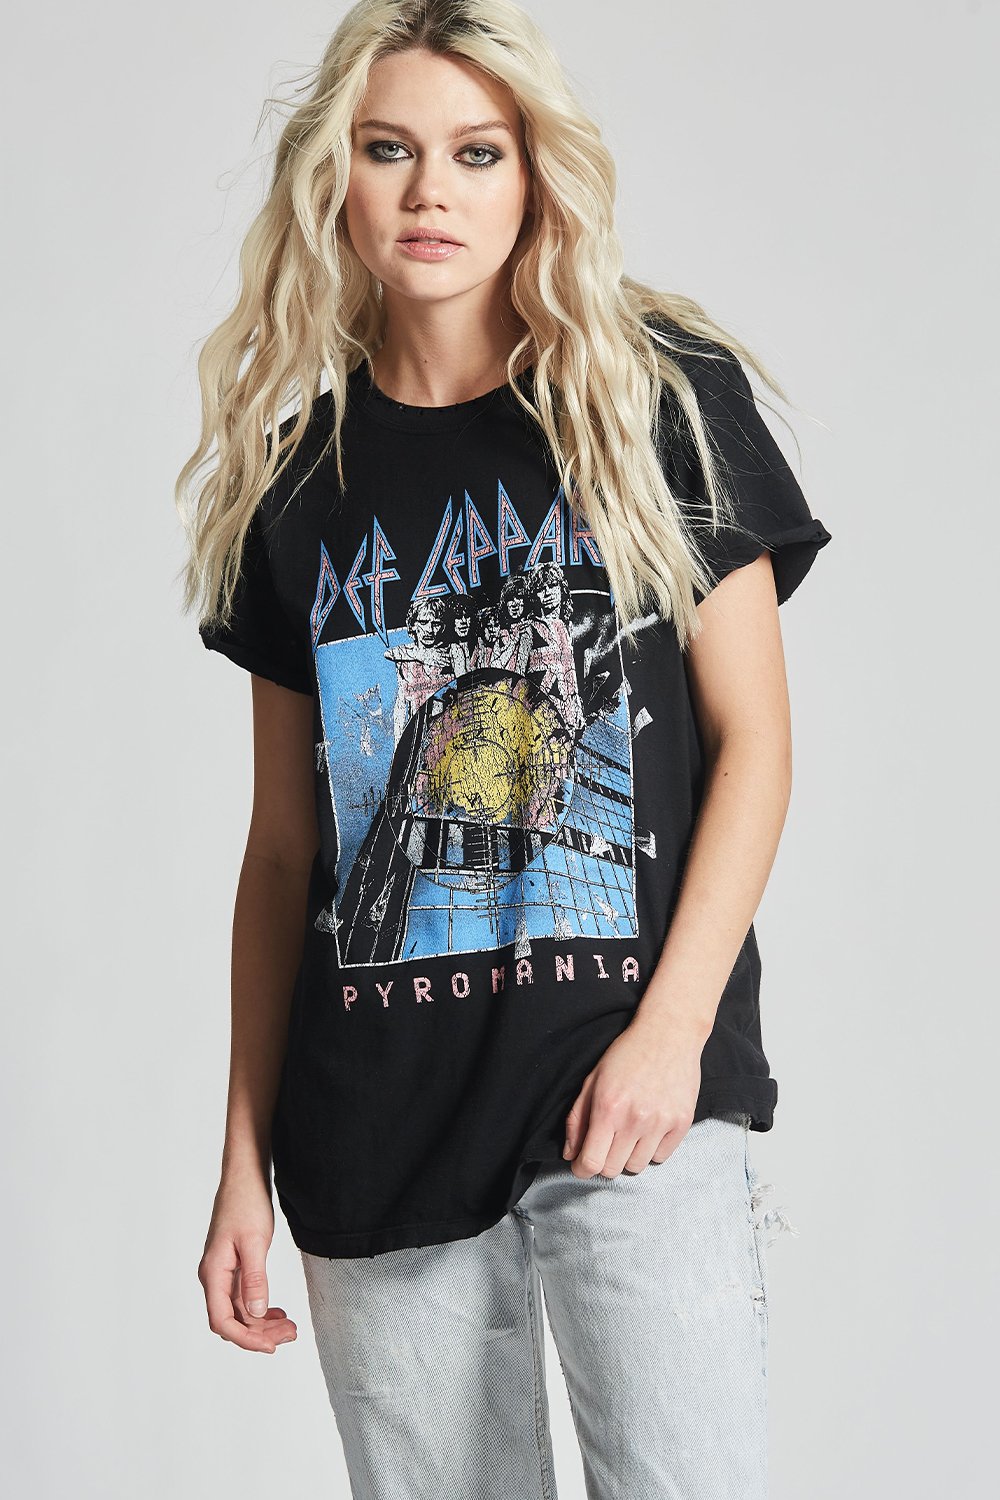 Def Leopard Pyromania Tour Graphic Tee Recycled Karma